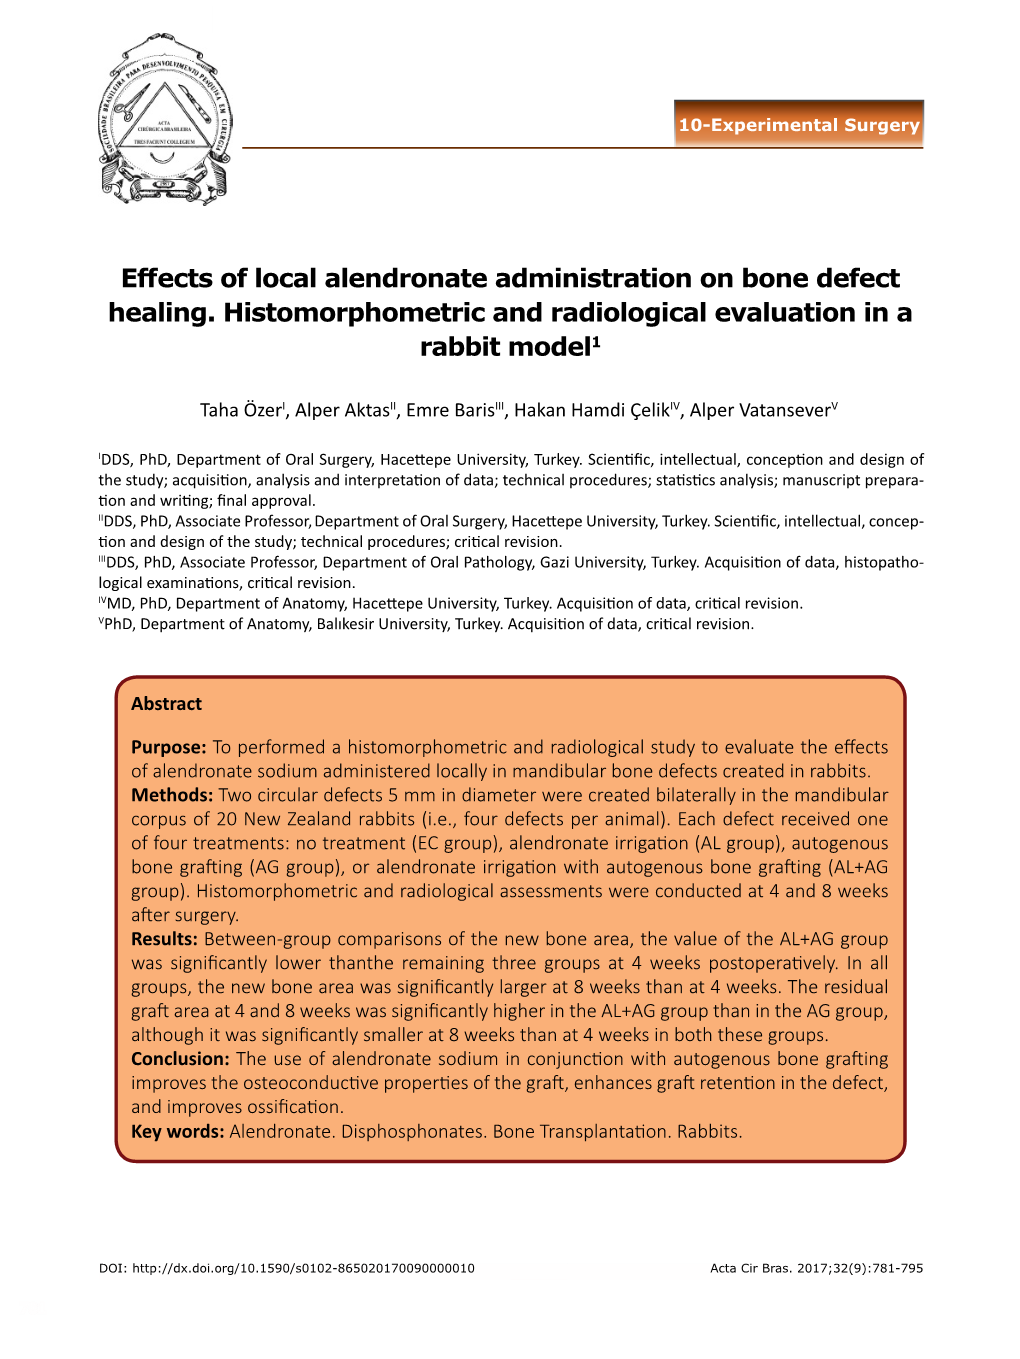 Effects of Local Alendronate Administration on Bone Defect Healing. Histomorphometric and Radiological Evaluation in a Rabbit Model1